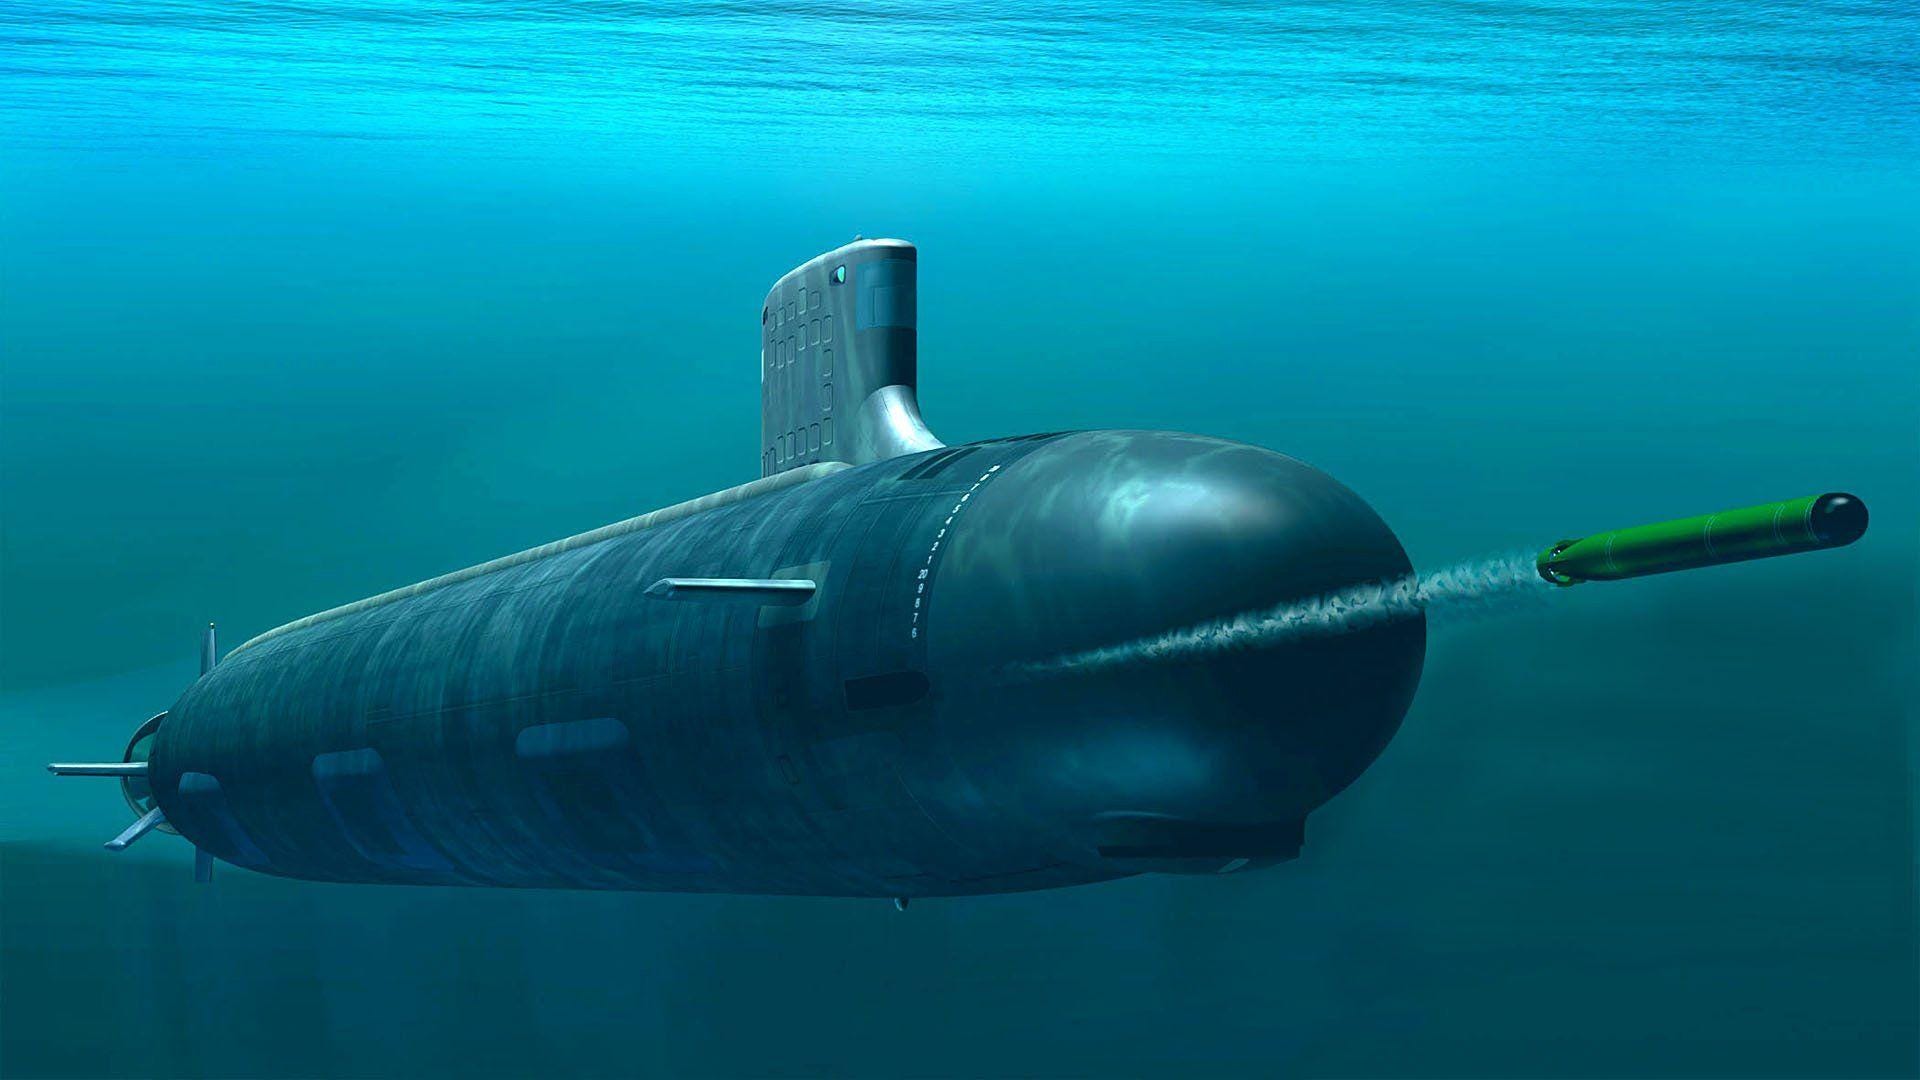 Unidentified Underwater Object Encounter in South China Sea